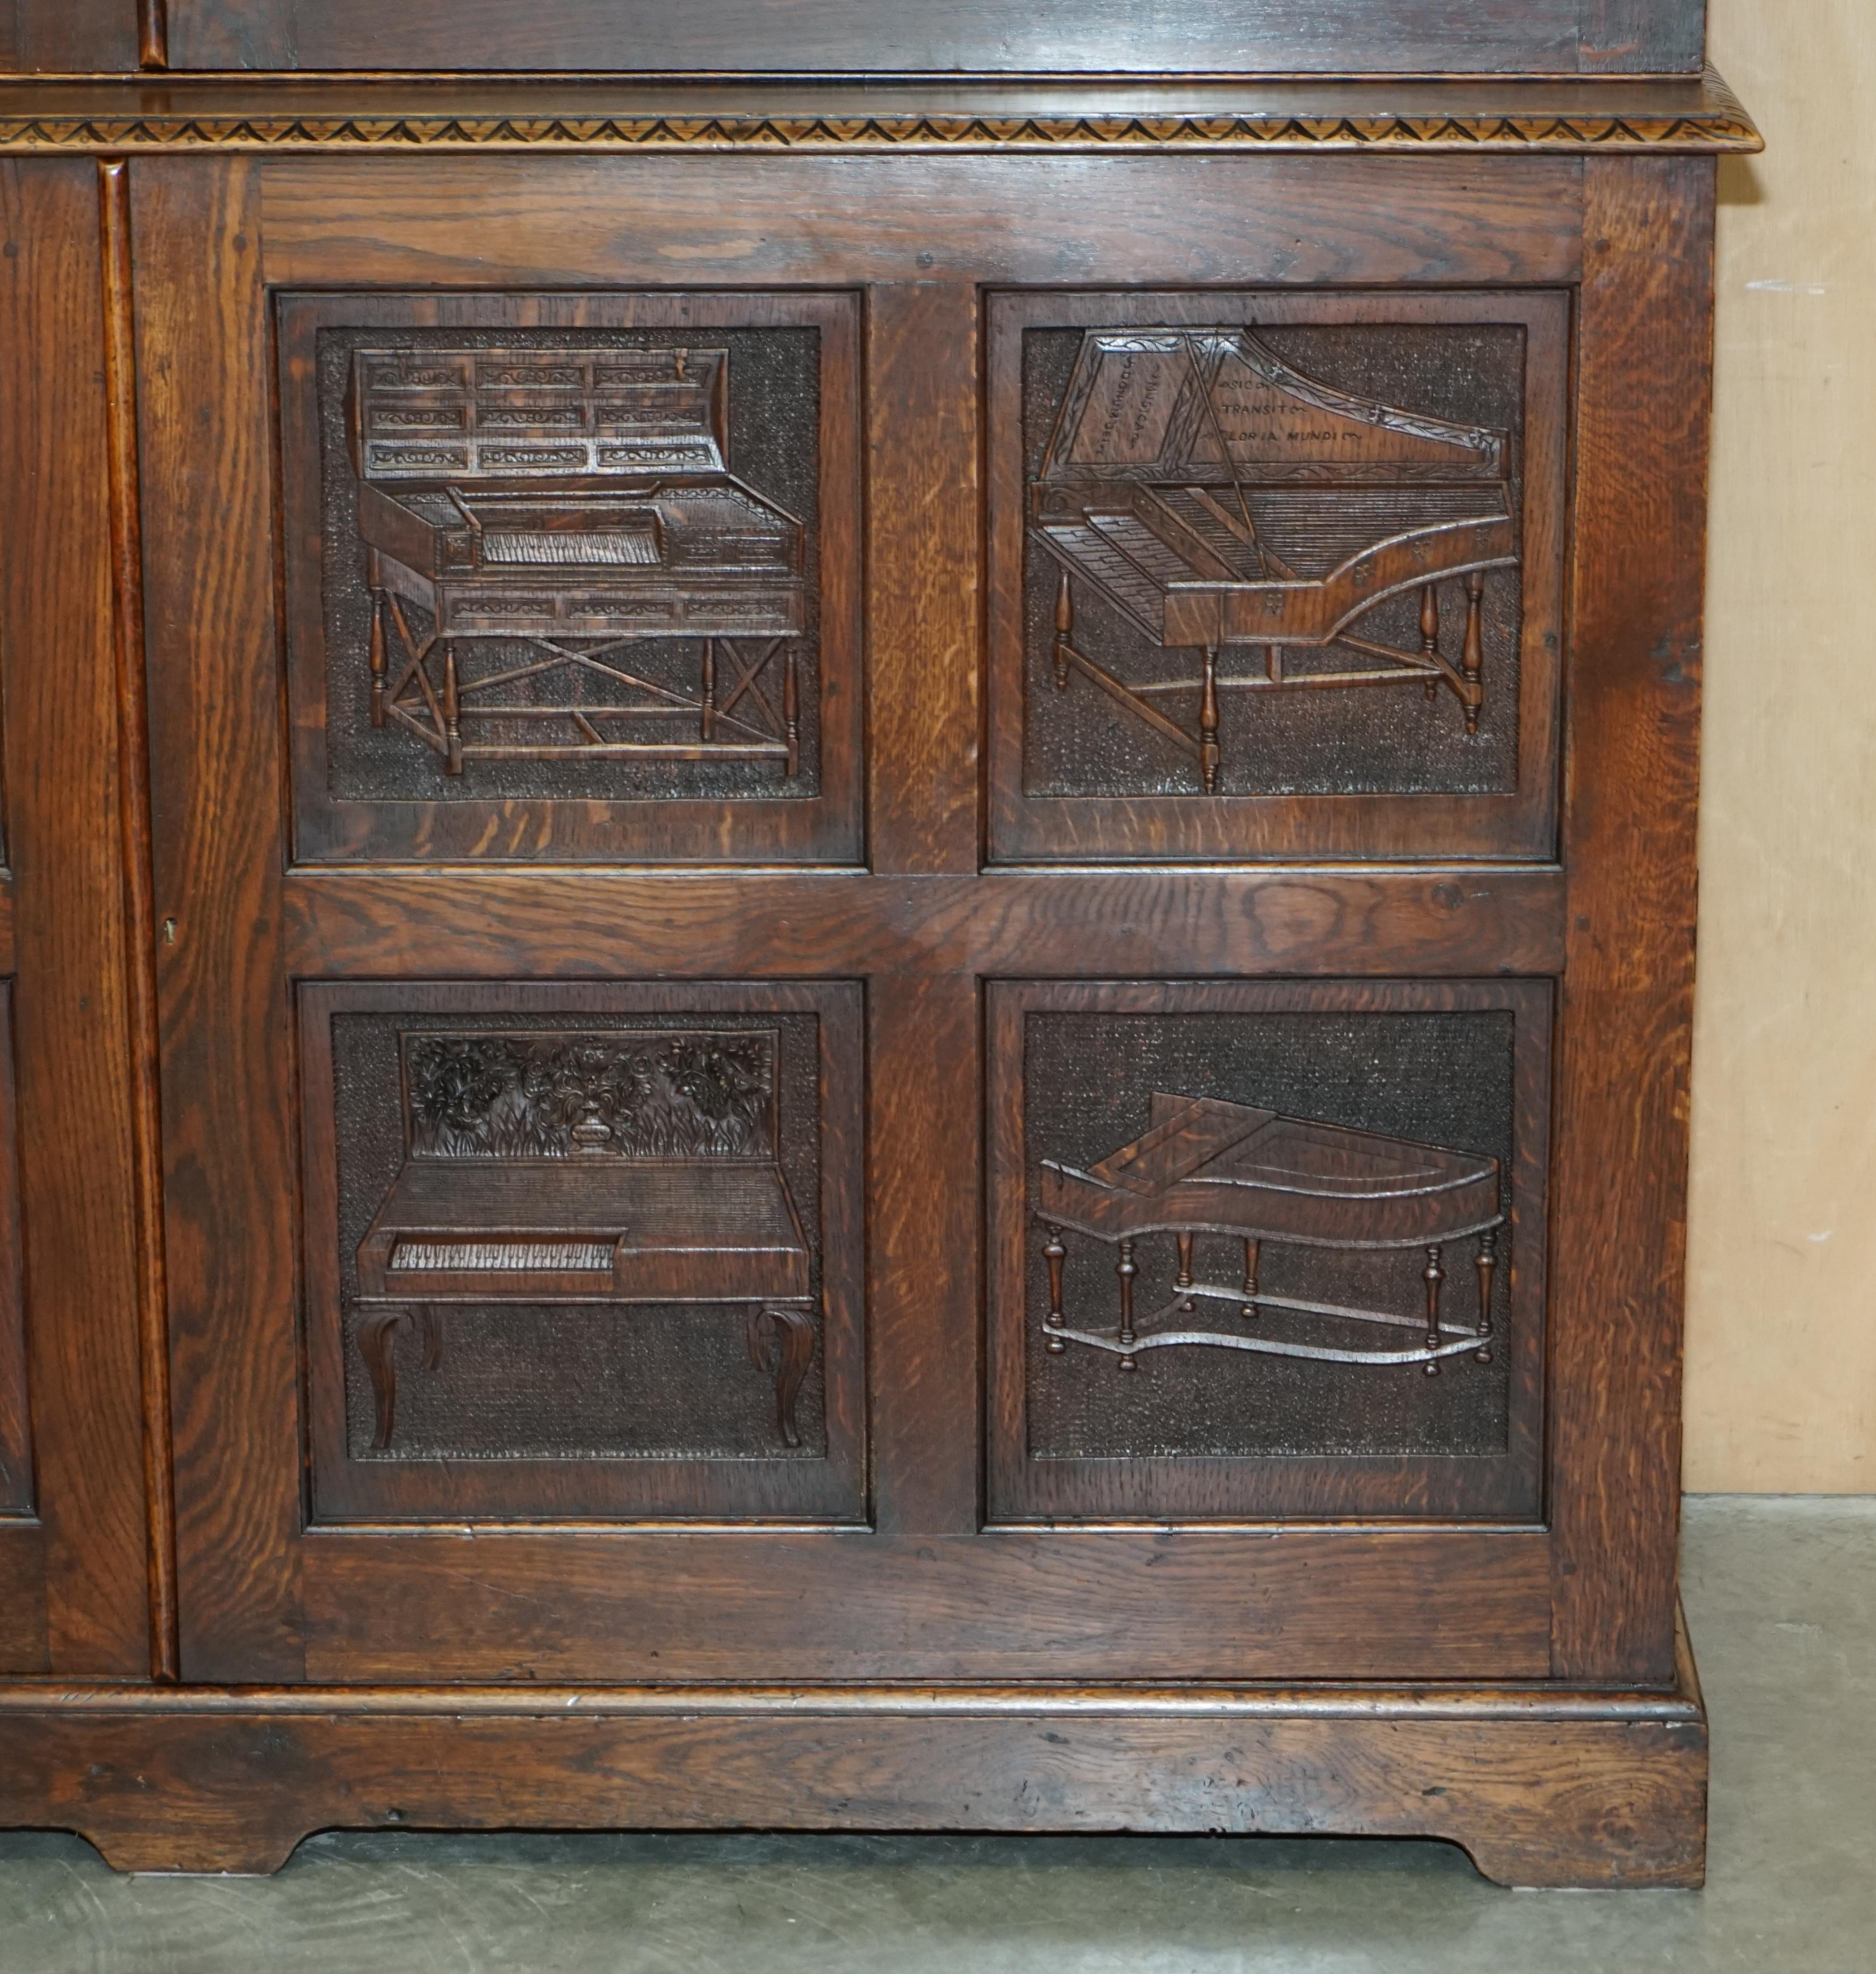 IMPORTANT CARVED BOOKCASE CABiNET FROM THE BATE COLLECTION IN OXFORD UNIVERSITY For Sale 3